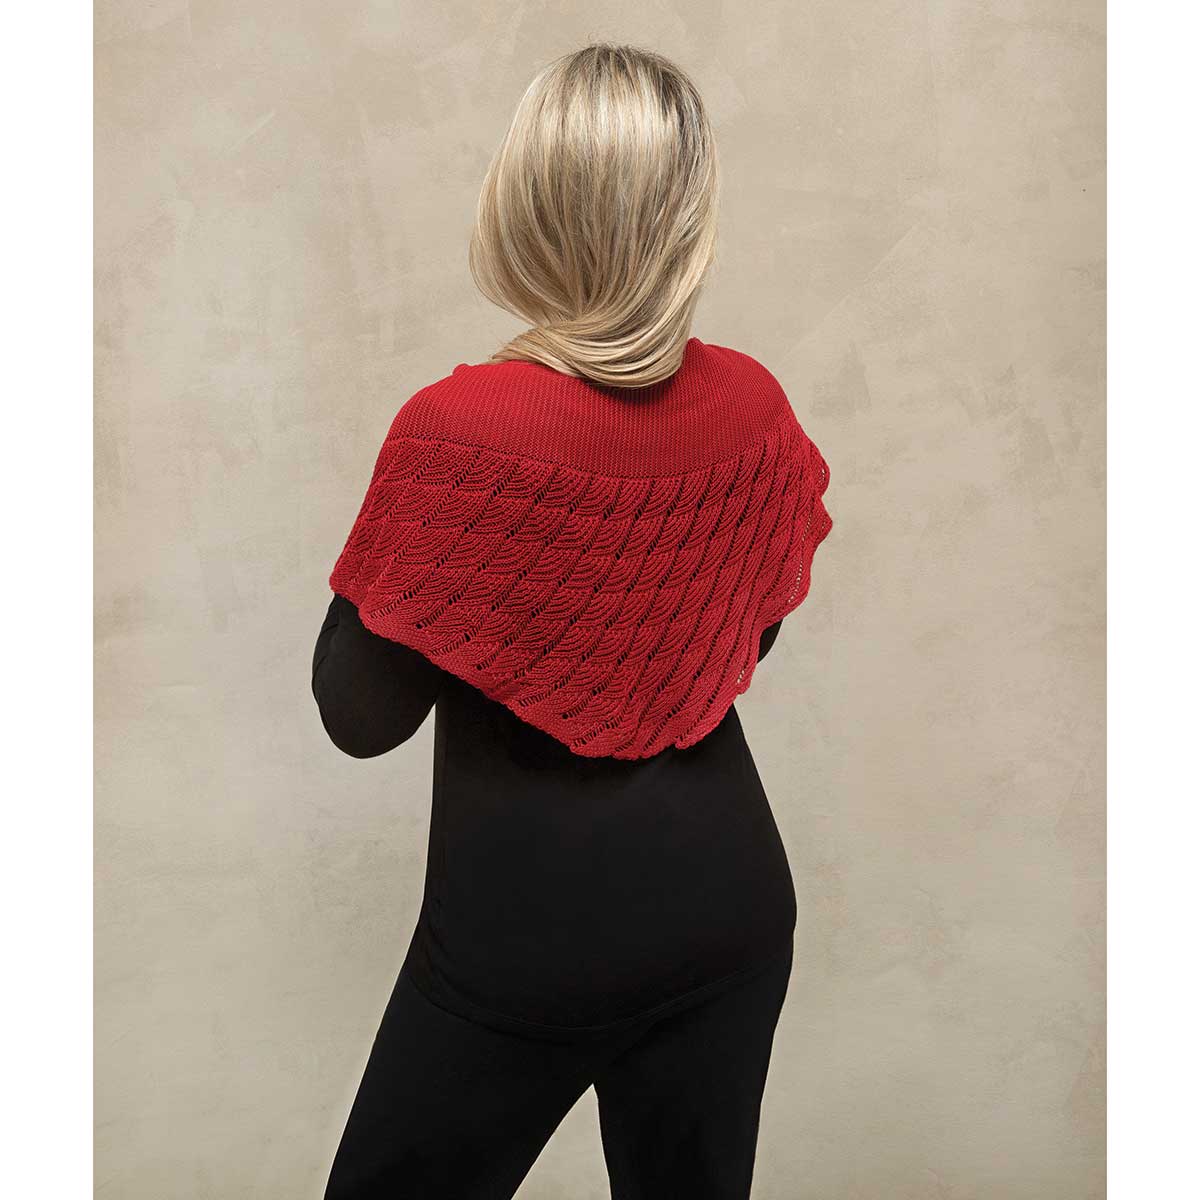 RED WRAP WITH PULL THROUGH CLOSURE 15"X23" (ONE SIZE FITS MOST)